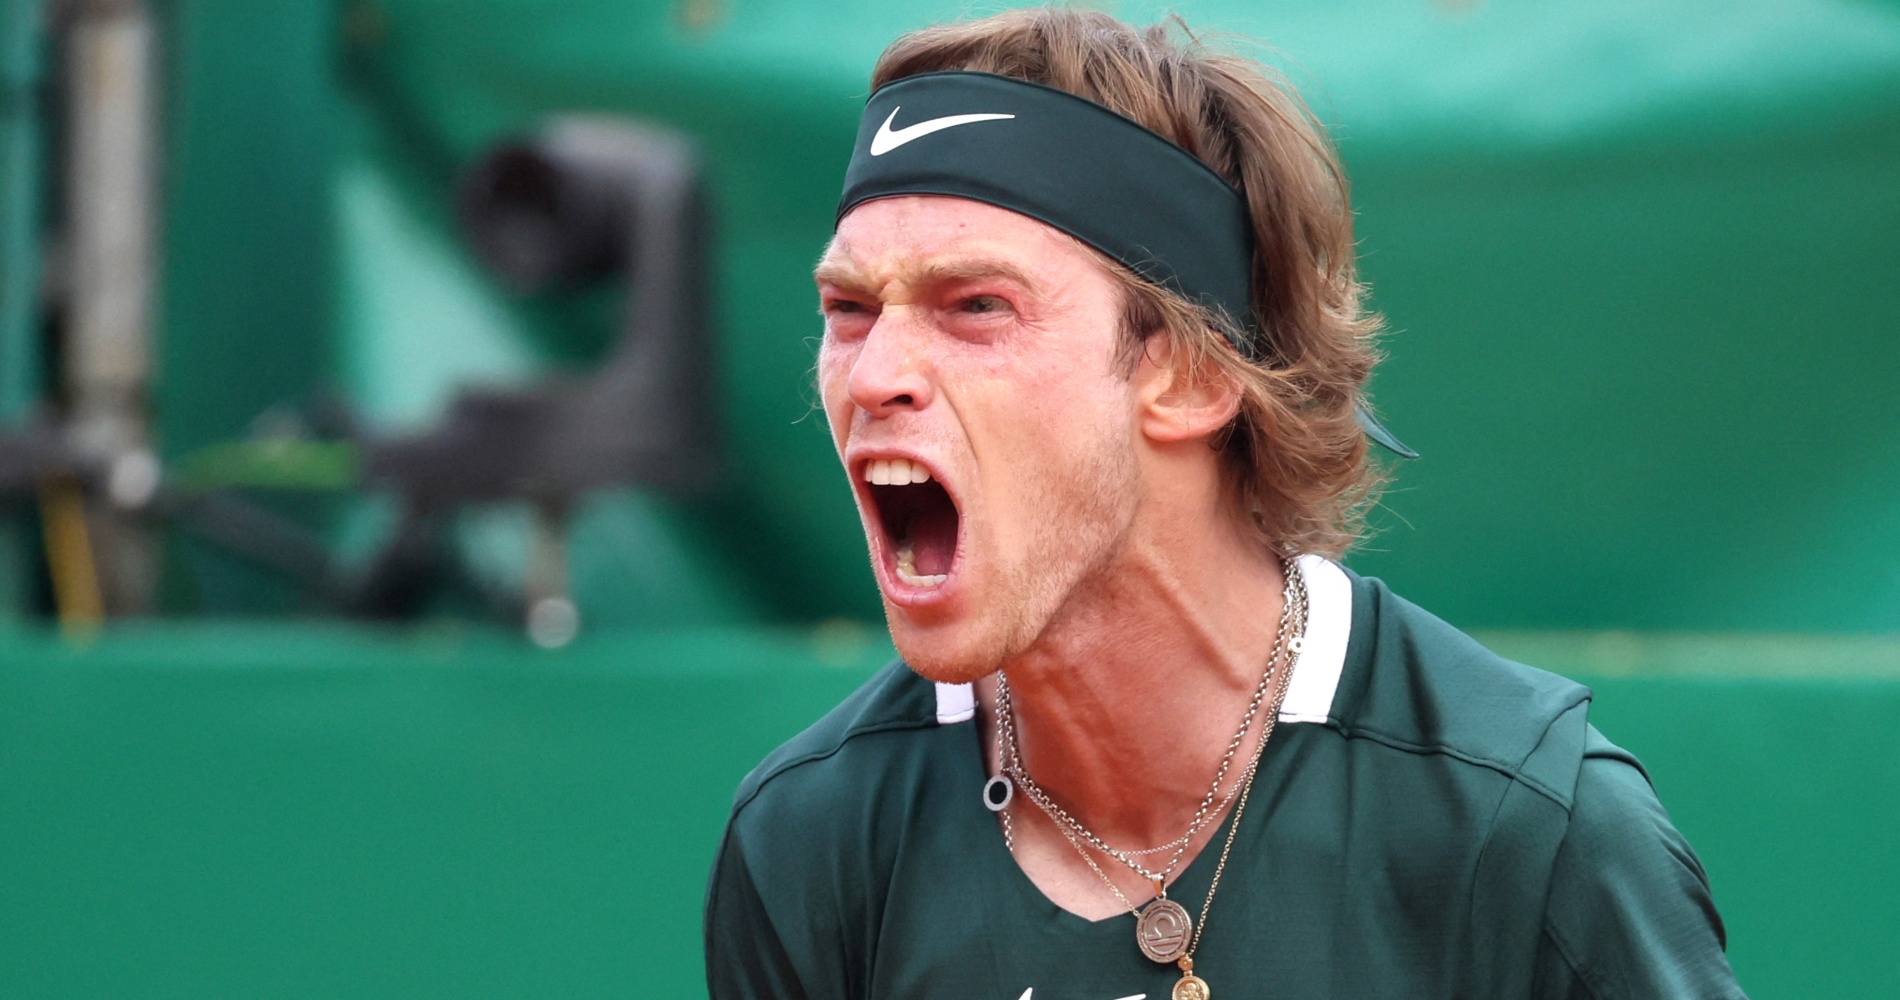 Tennis: Andrey Rublev on what he needs to take the next step